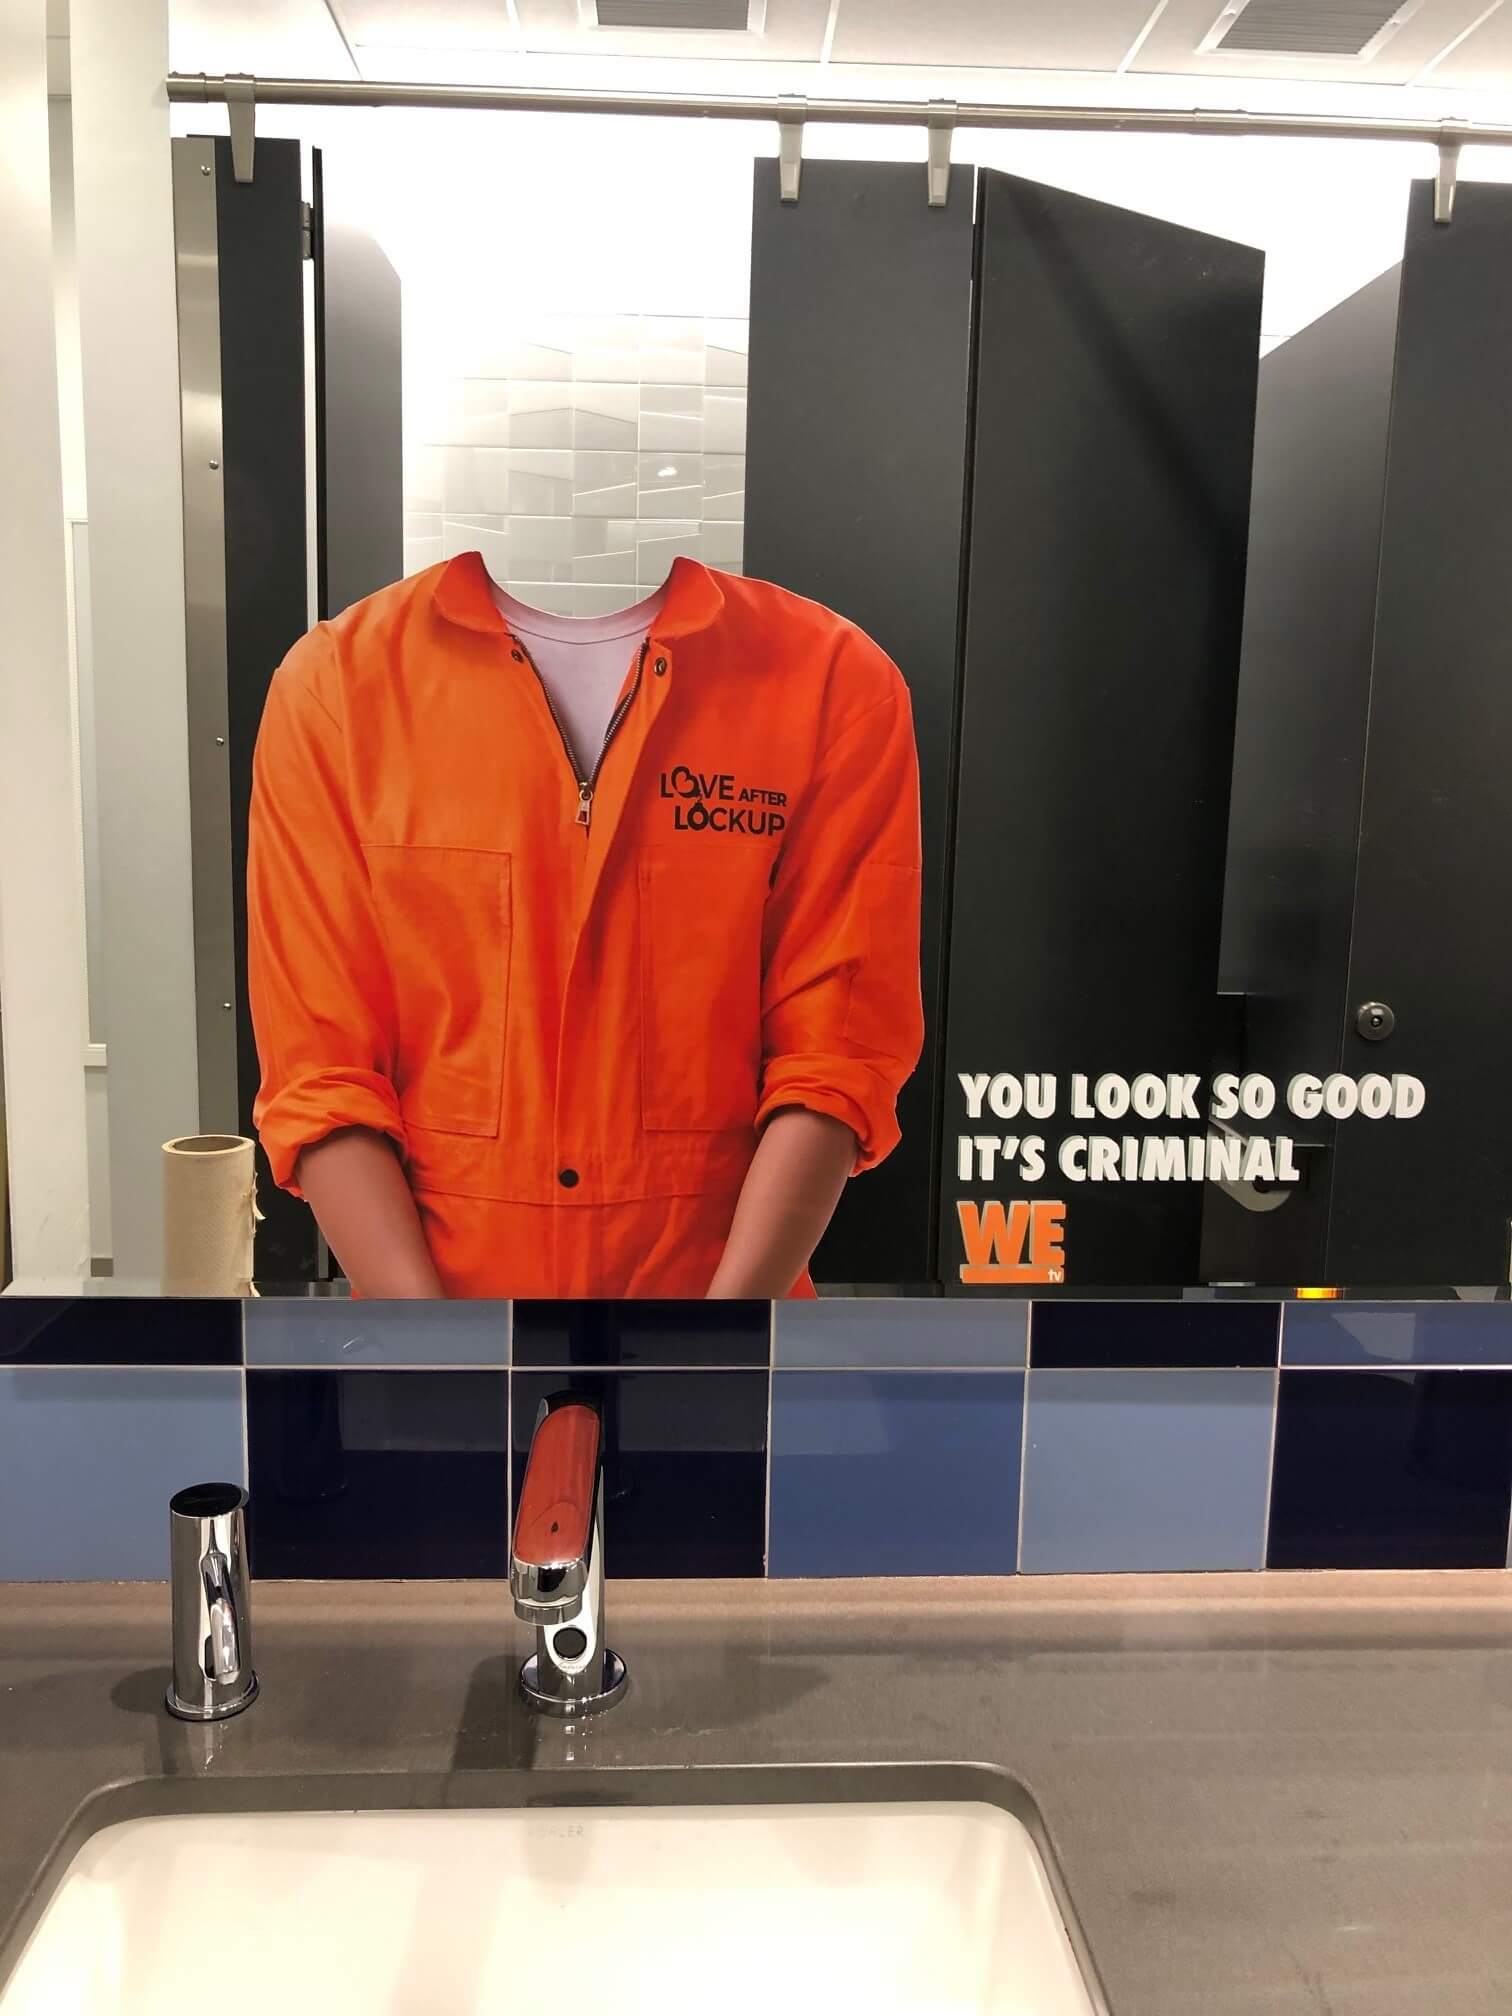 Creative Signage is important whether it’s in your office, restroom, outside, or in an elevator!  Talk about a captive audience....and who can’t resist a selfie with a jumpsuit. Sure does beat stripes!